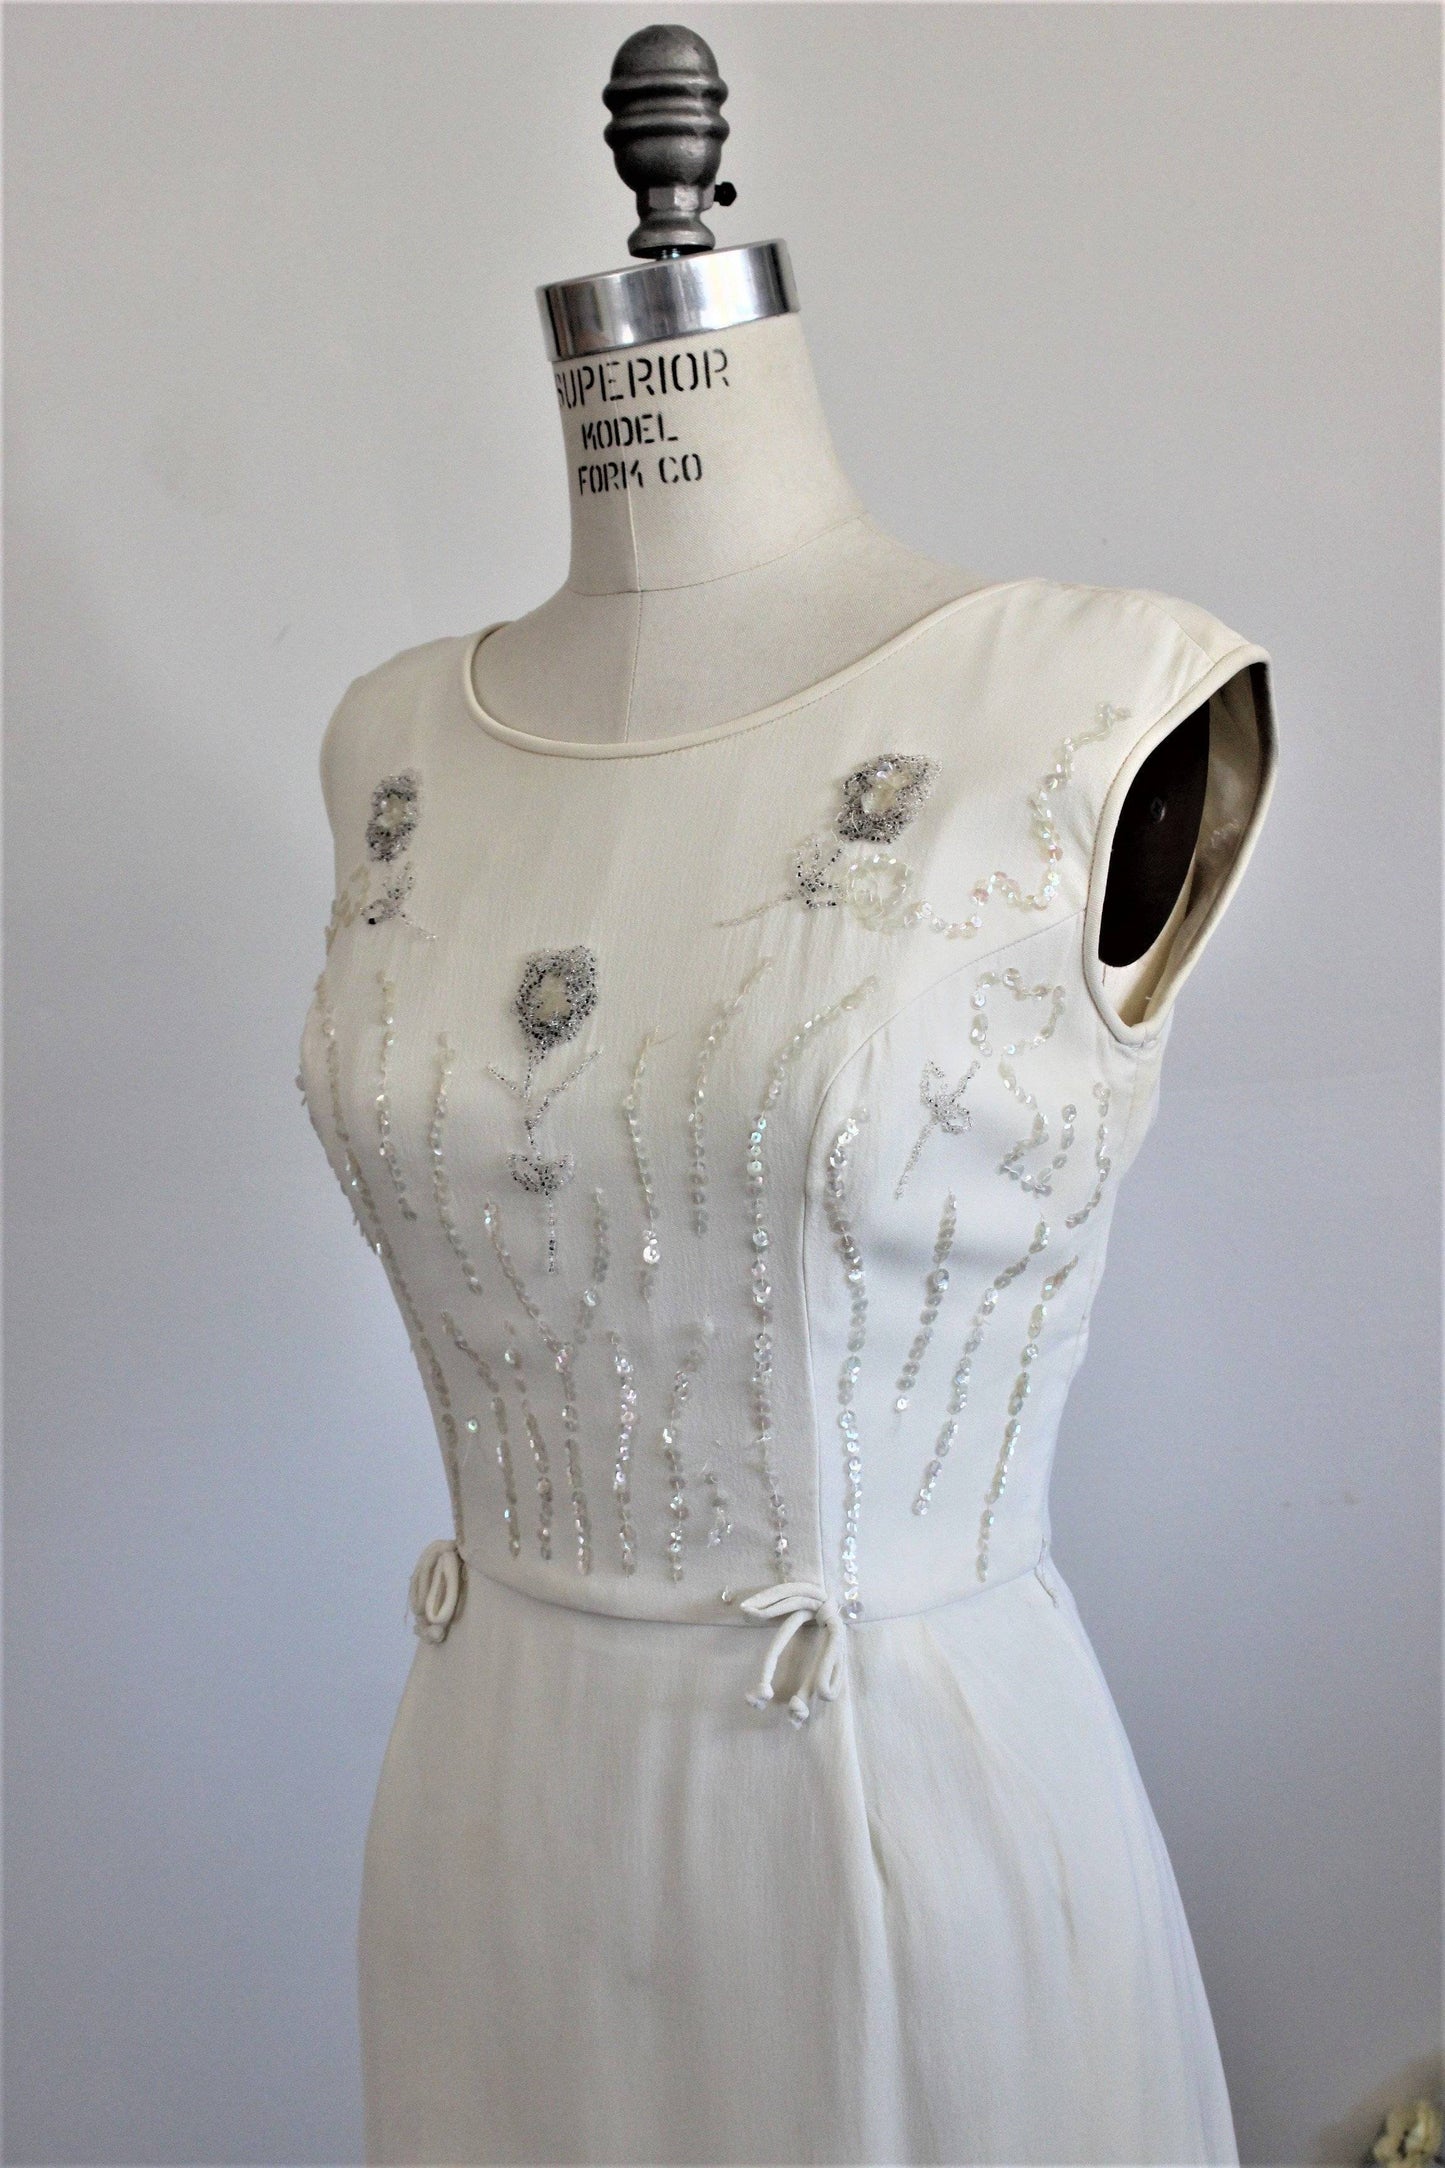 Vintage 1960s White Beaded Wiggle Dress With Sequins-Toadstool Farm Vintage-1960s Dress,1960s Mod Dress,Metal Zipper,Sequins,Vintage,Vintage Clothing,Vintage Cocktail Dress,Vintage Dress,Vintage Dresses,Wedding DRess,White Beaded Dress,Wiggle Dress